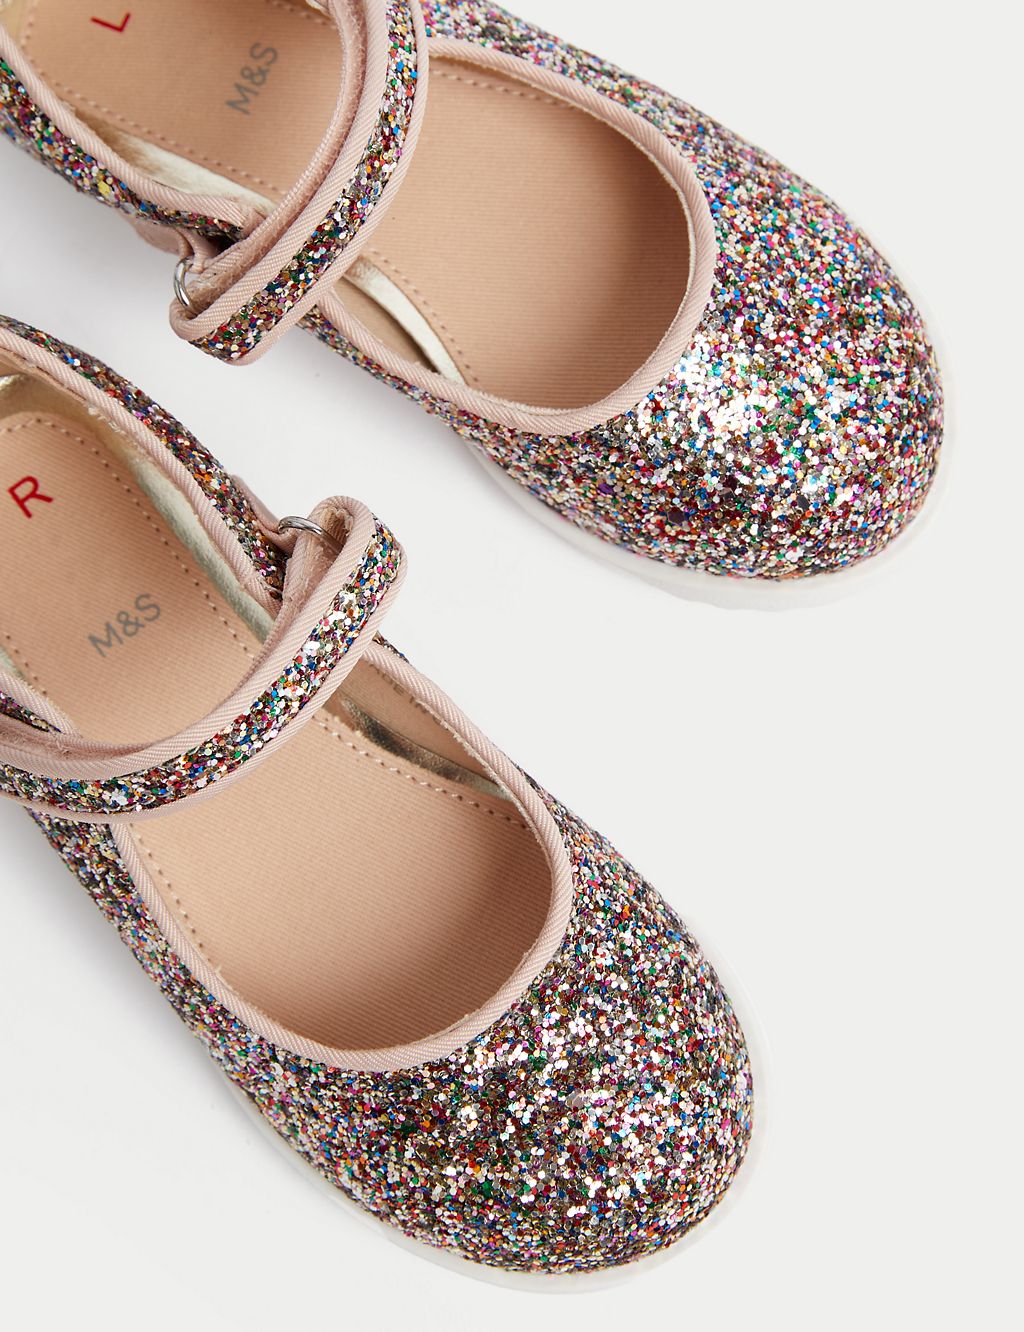 Kids' Riptape Glitter Mary Jane Shoes (3 Small - 2 Large) 2 of 4